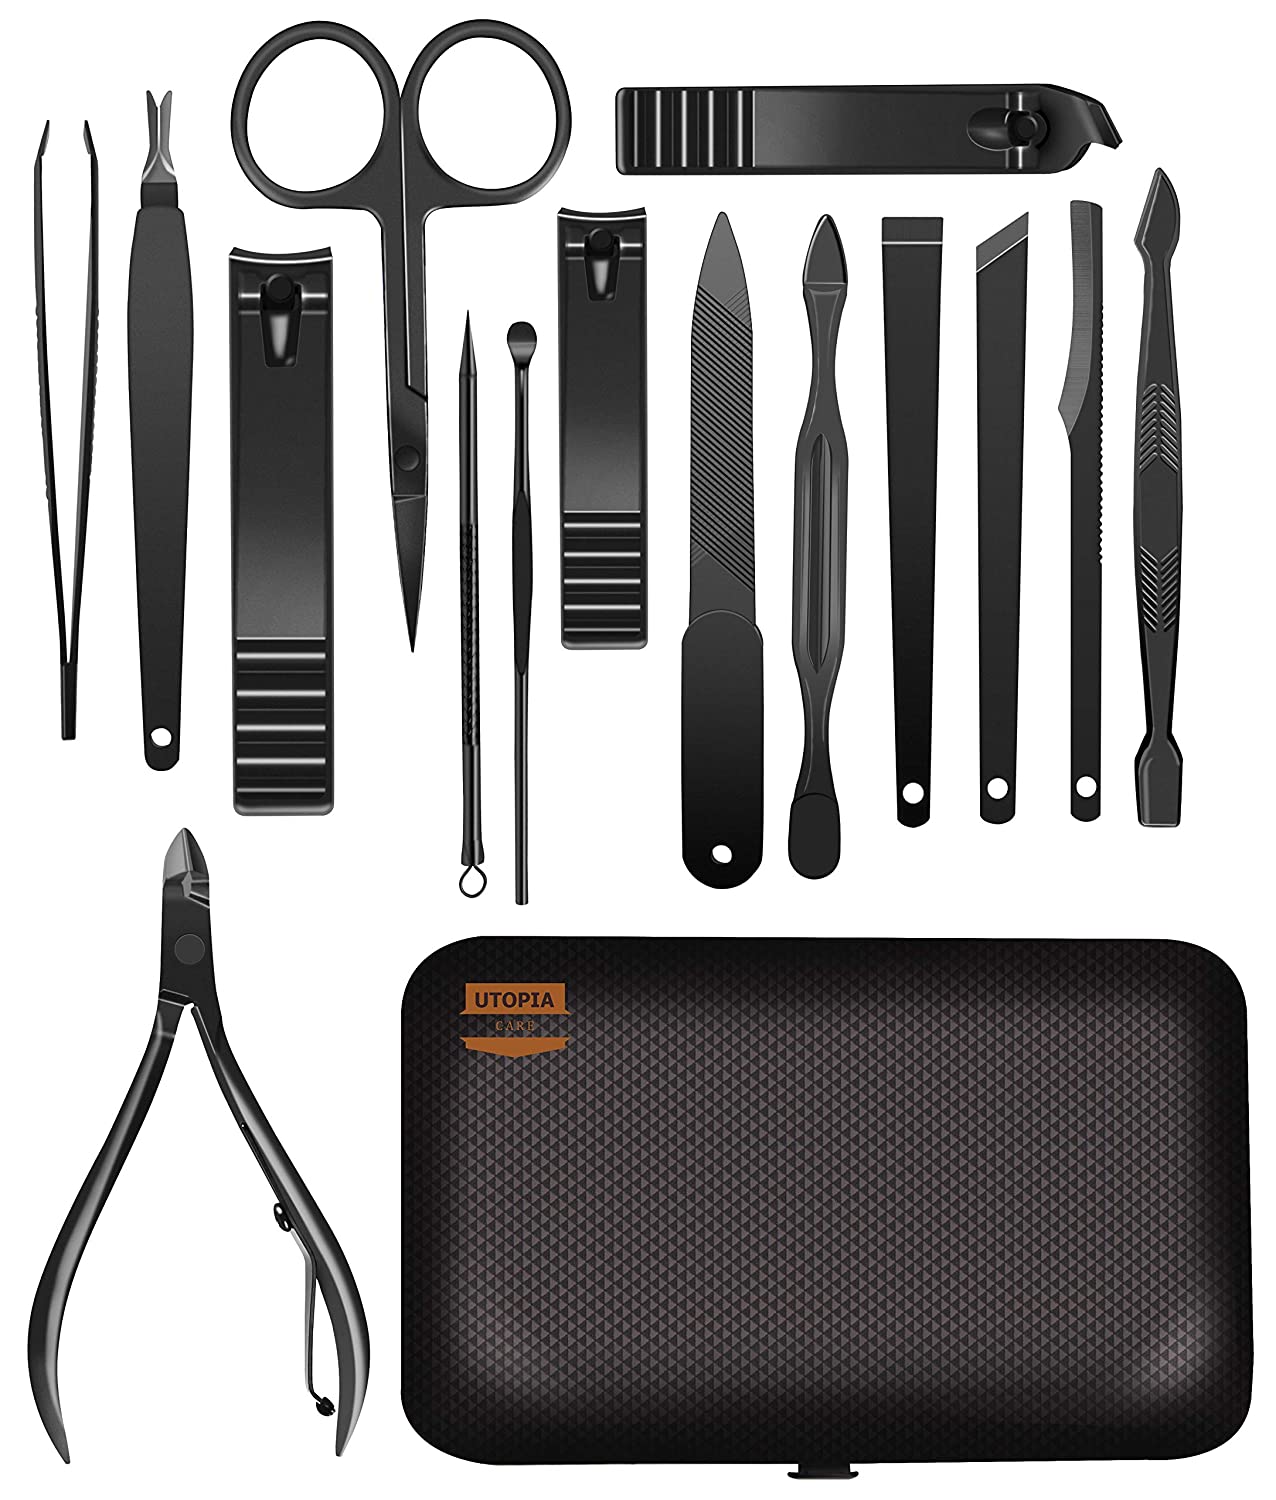 15-Piece Manicure Set for Women Men Nail Clippers Stainless Steel Manicure Kit - Portable Travel Grooming Kit - Facial, Cuticle and Nail Care - (For 8 piece(s))